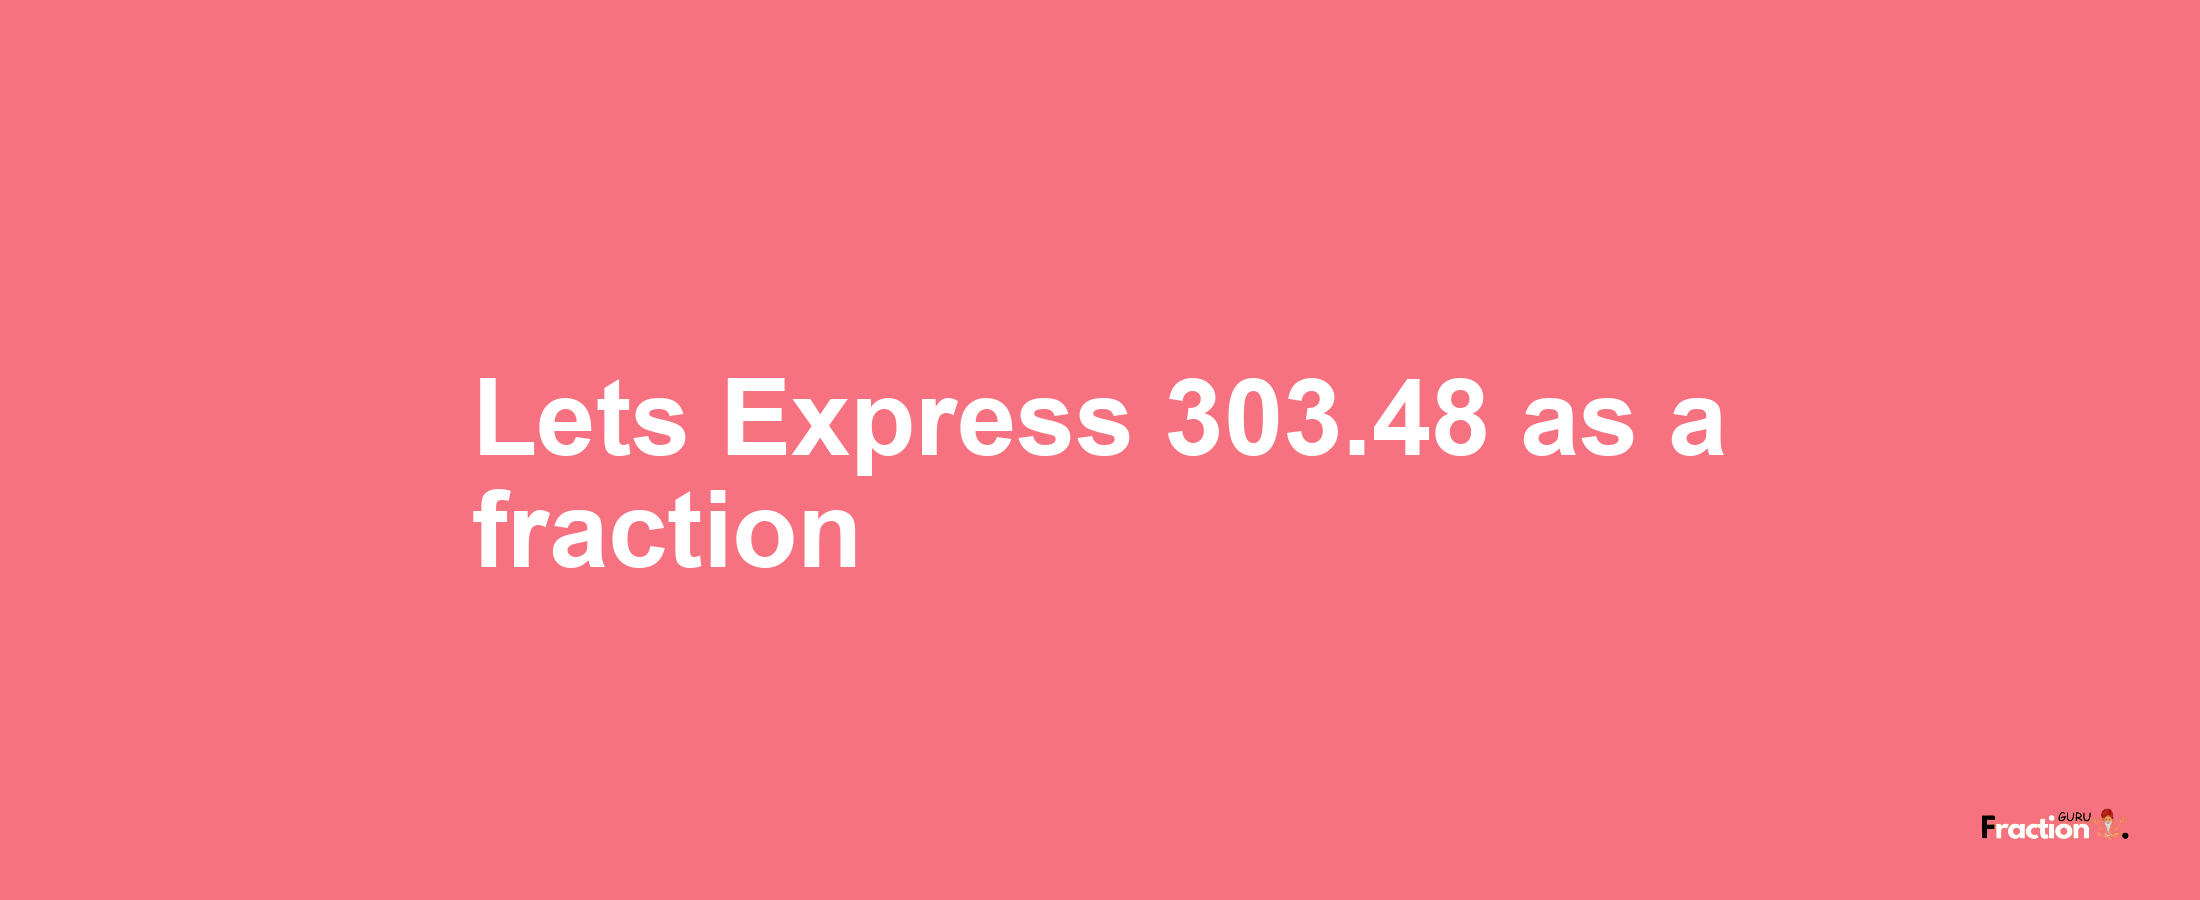 Lets Express 303.48 as afraction